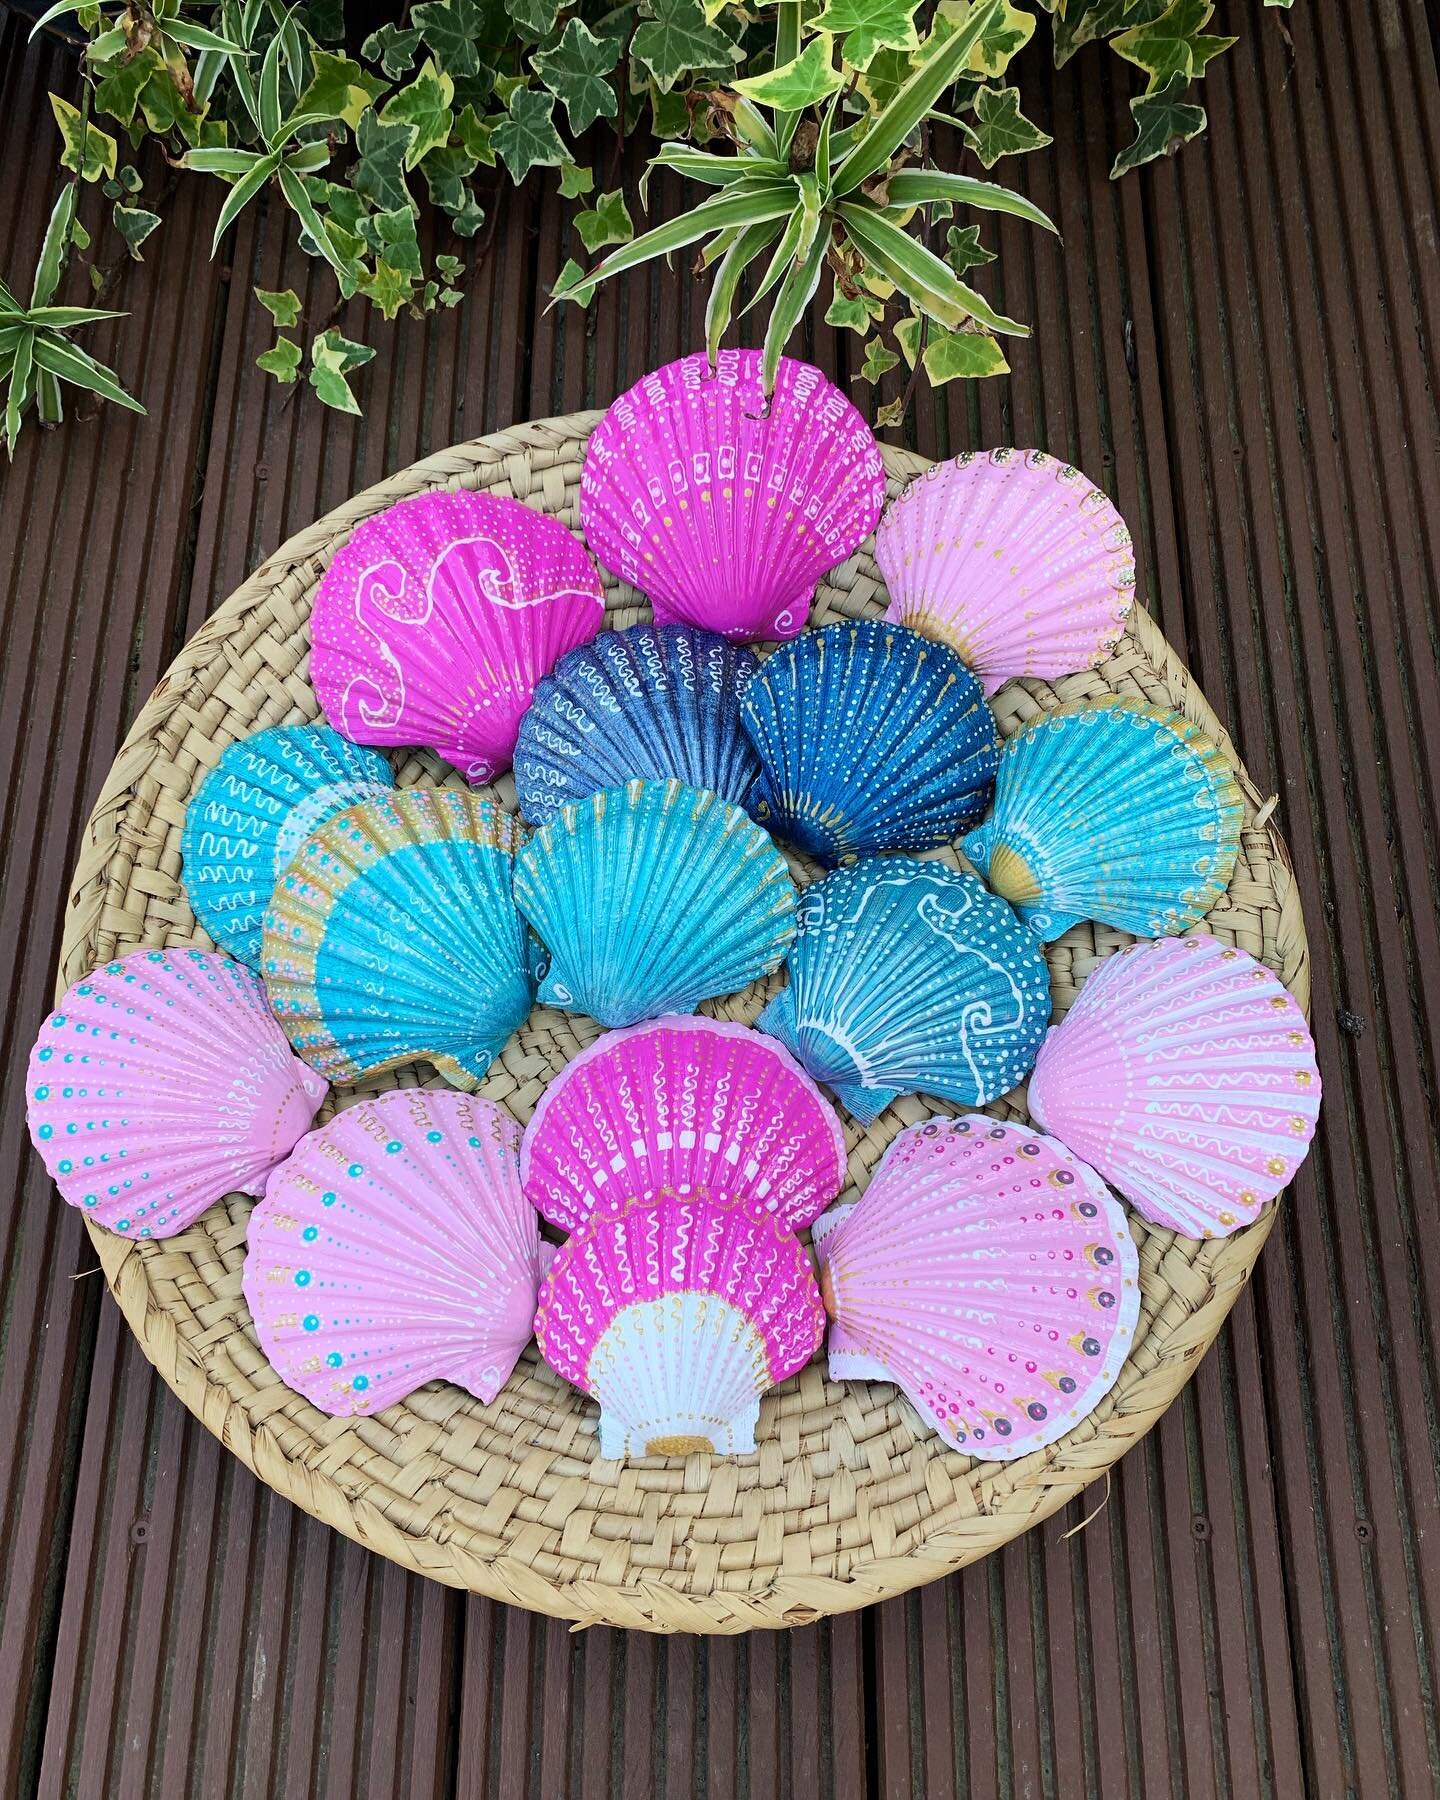 I&rsquo;m back ! And here&rsquo;s a basket of painted scallop shells to celebrate. Happy Friday everyone 😀